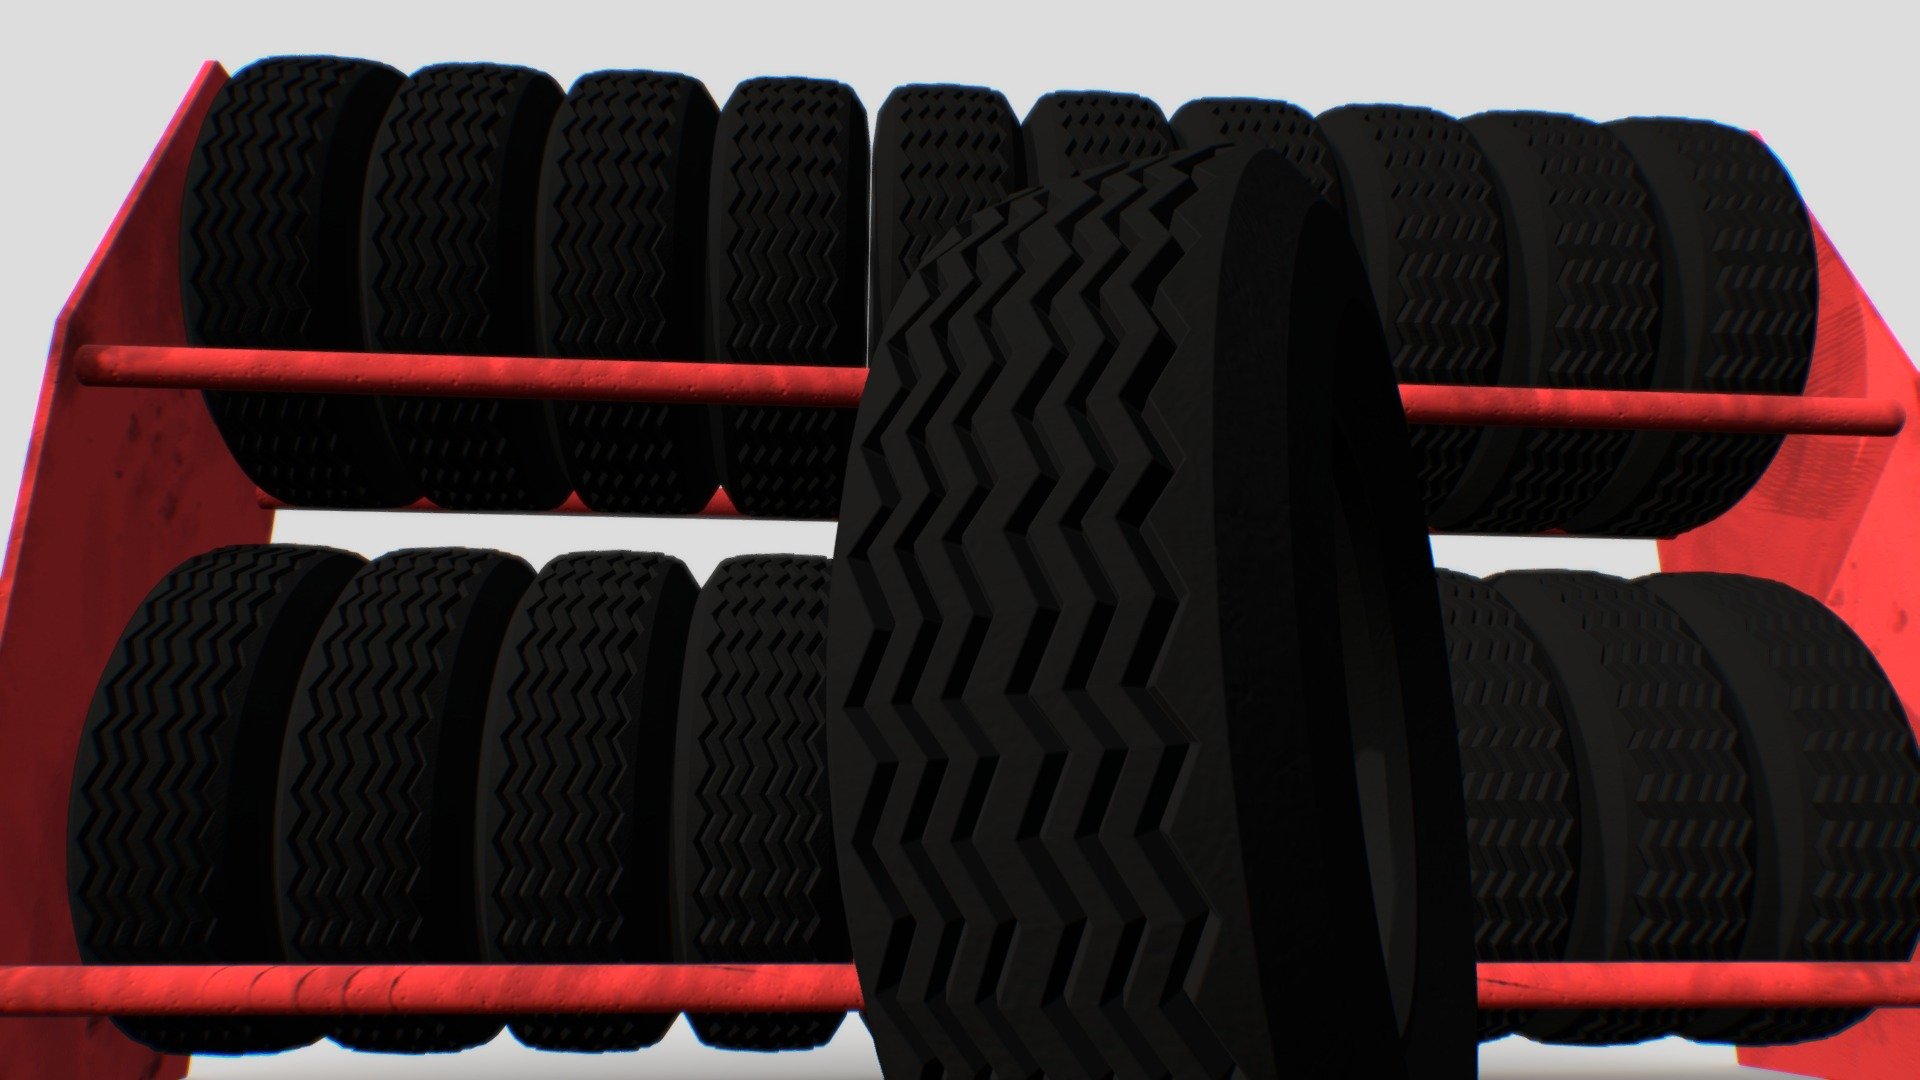 A rack full of regular truck tires for your tire business, brand new tires ready to be put on your wheels 3d model